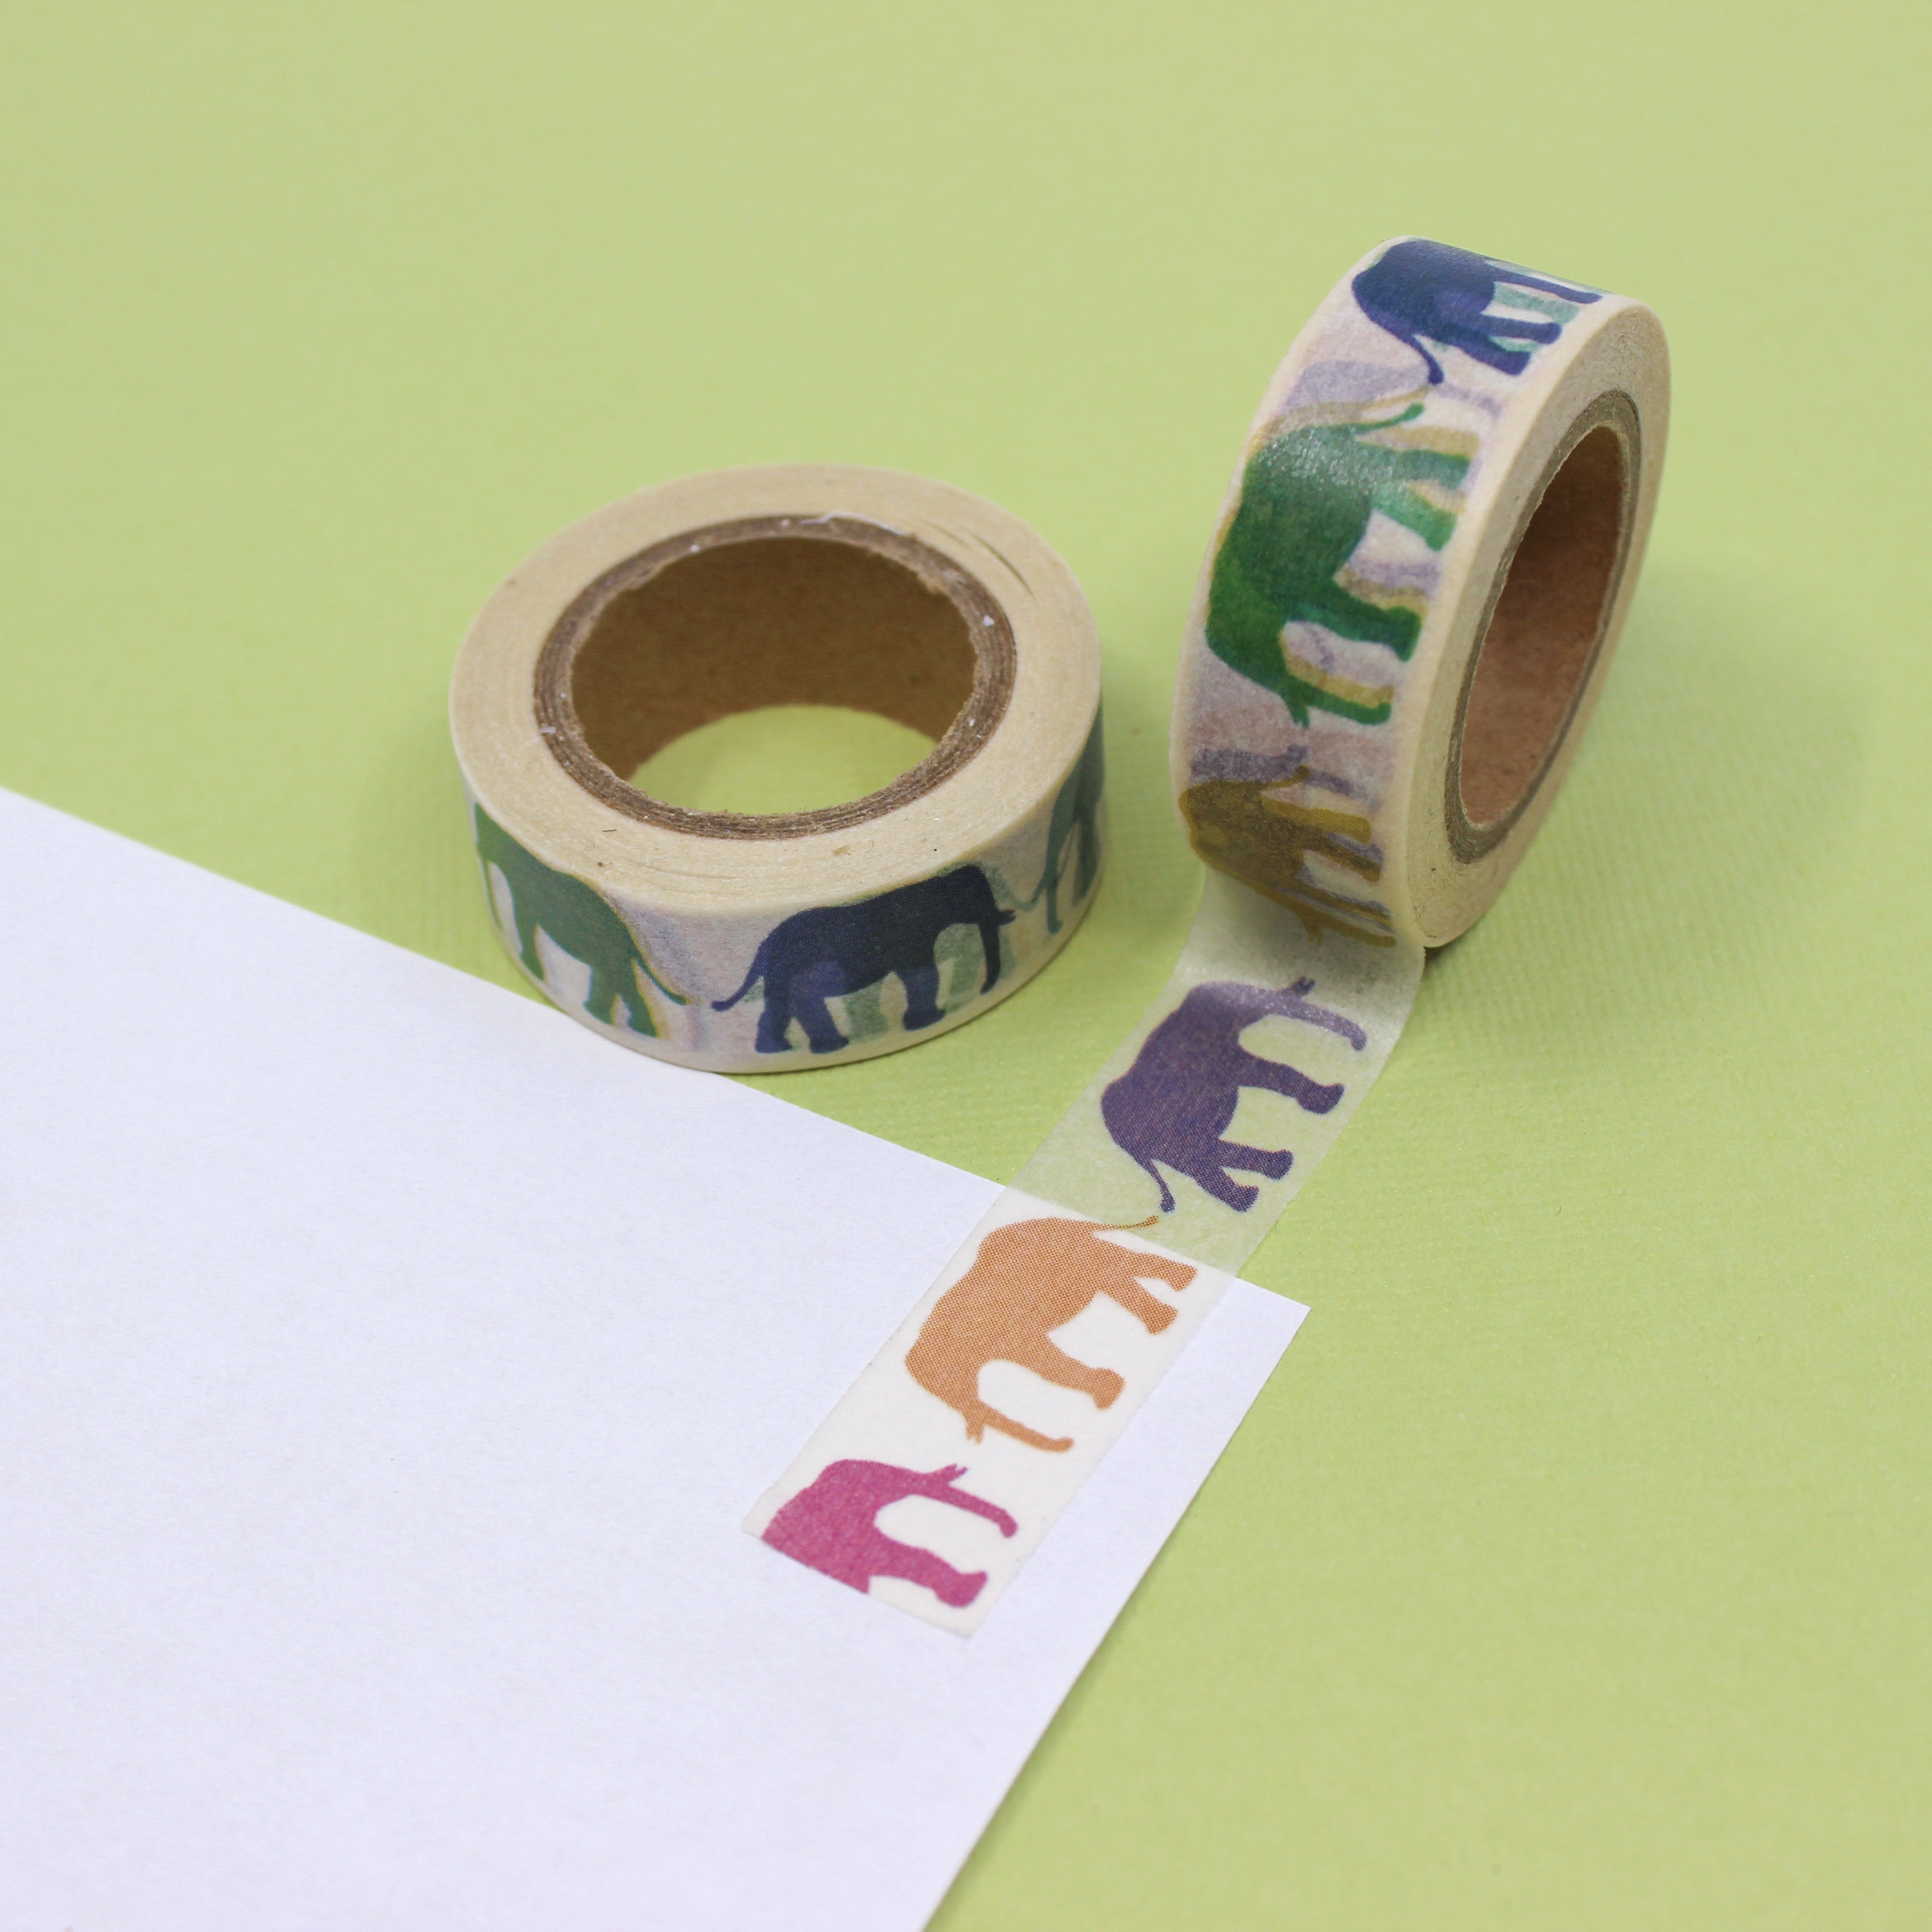 This is purple, blue and pink elephants pattern washi tape from BBB Supplies Craft Shop